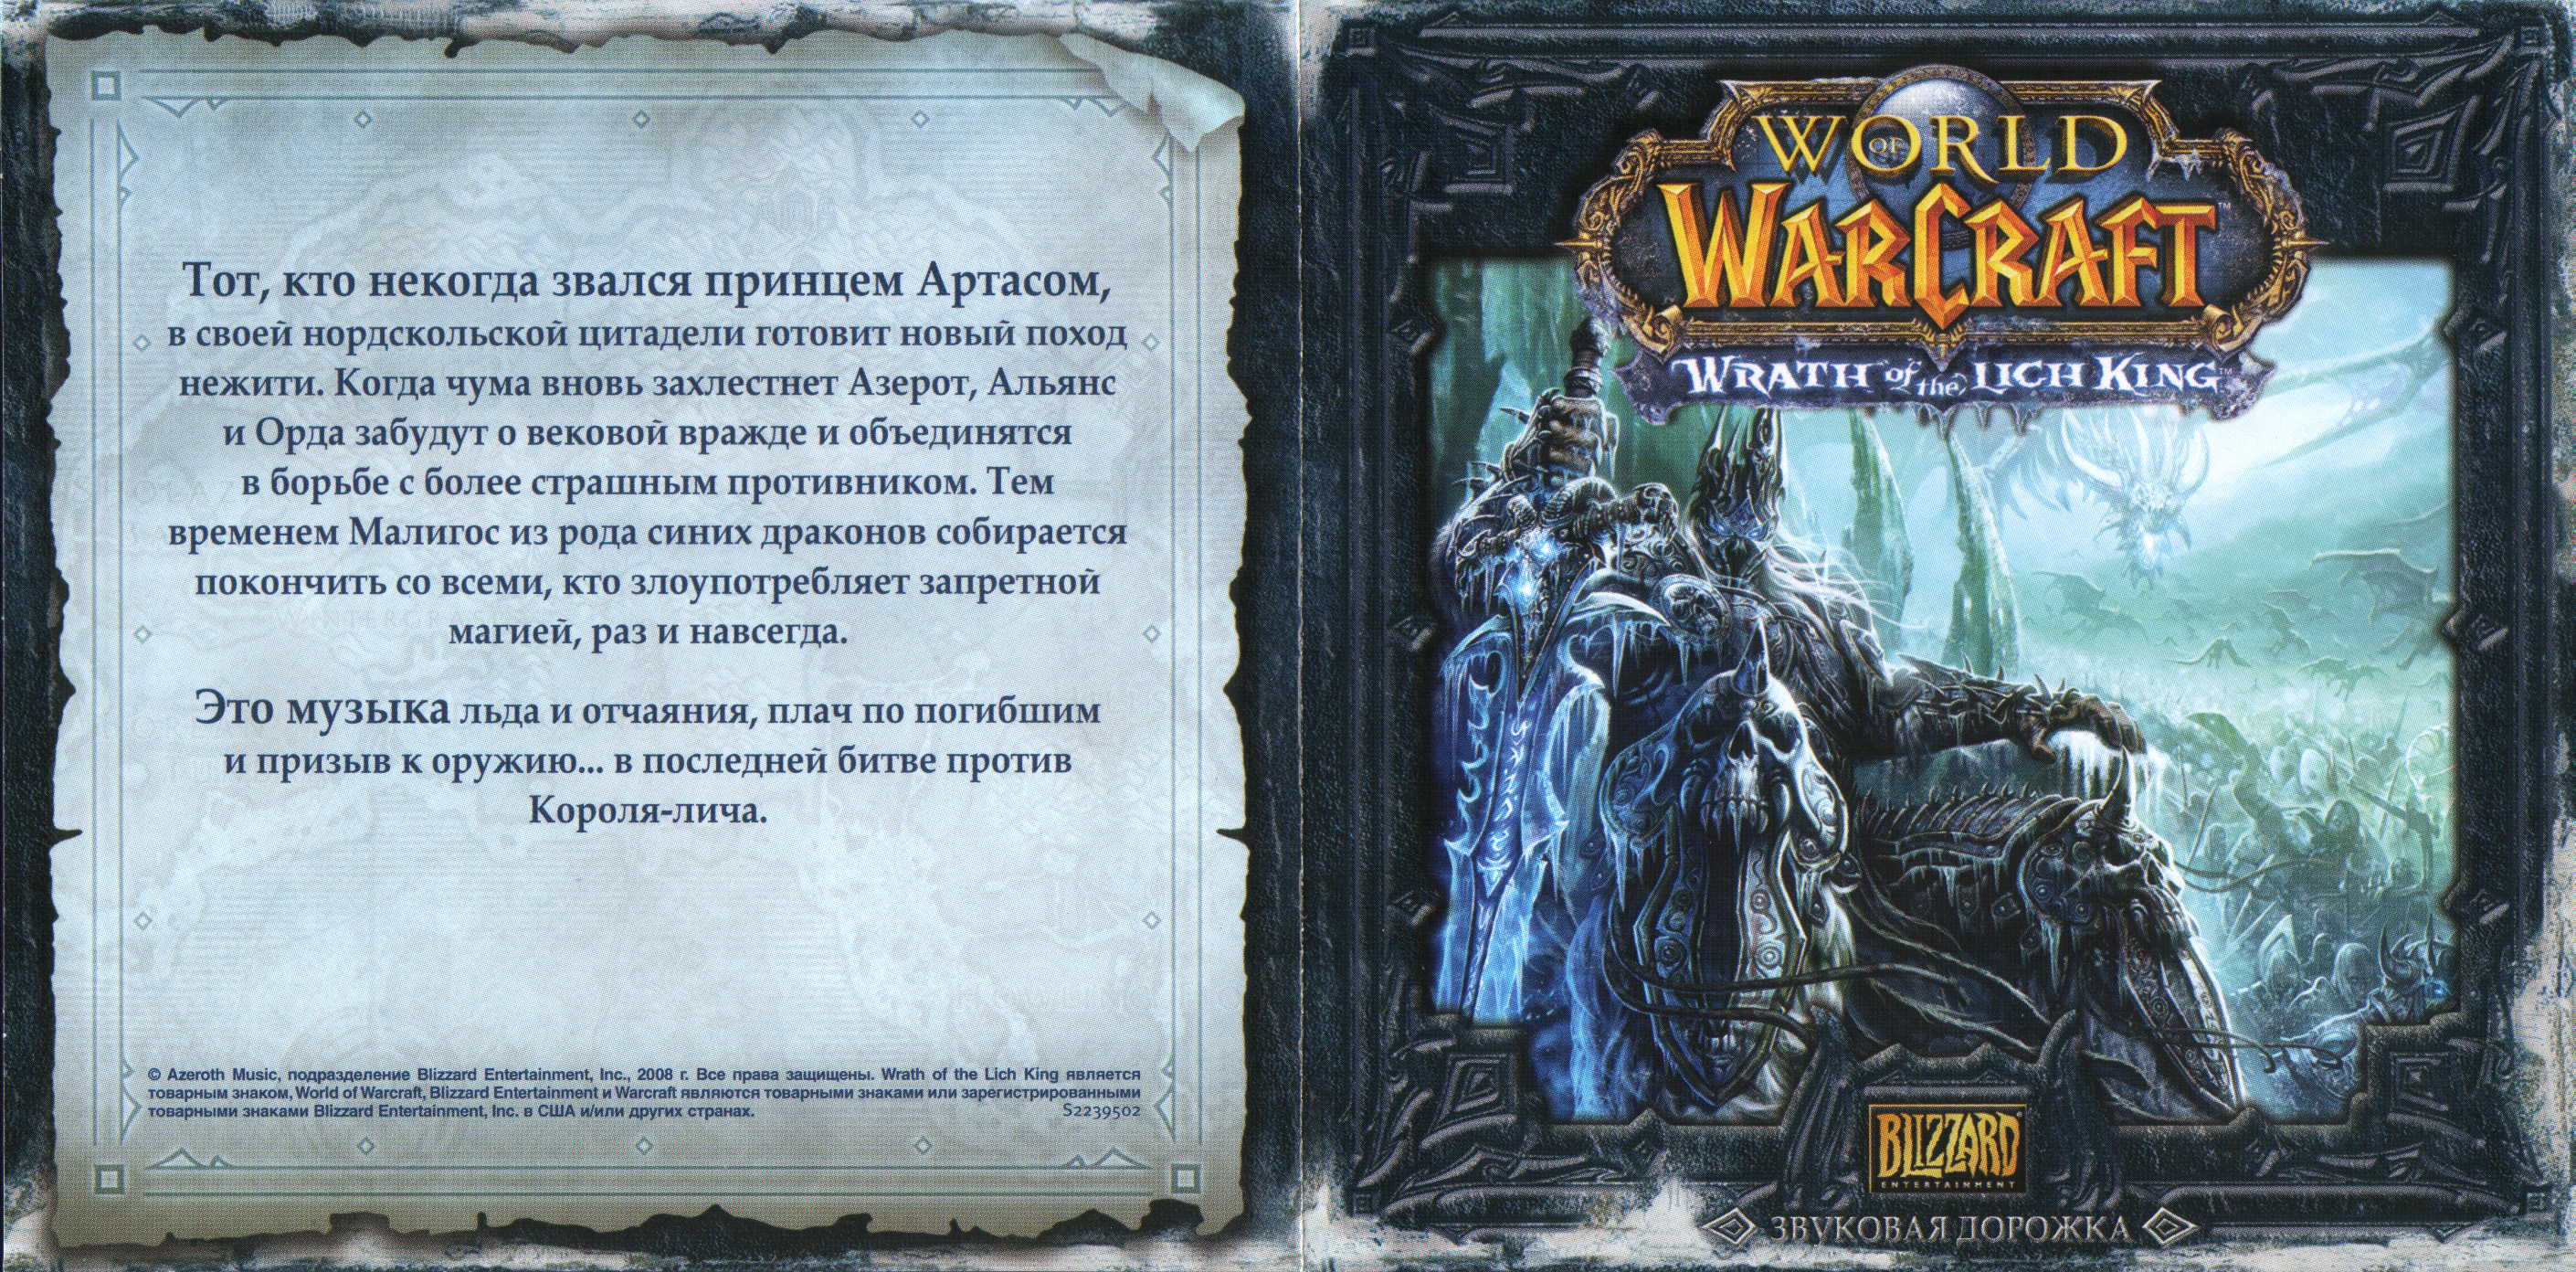 World of Warcraft: Wrath of the Lich King Soundtrack (2008) MP3 